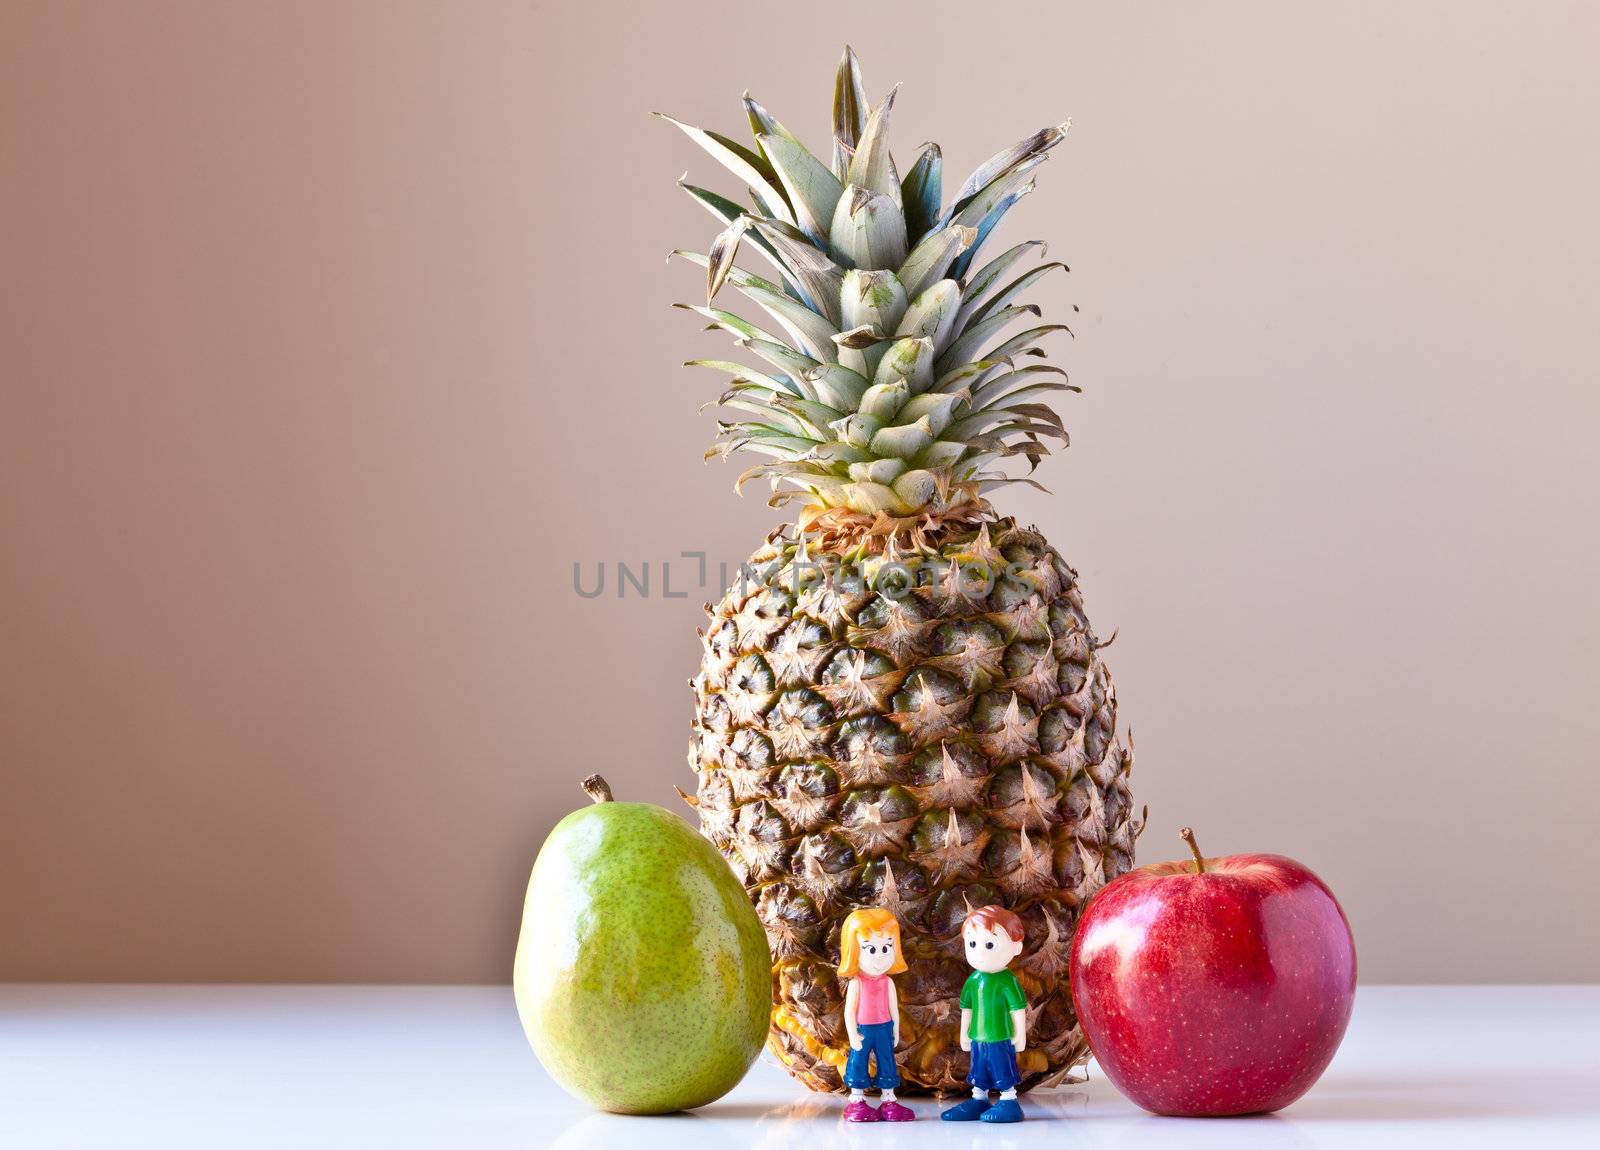 Toy girl and boy overwhelmed by making good food choices. They are standing in front of pineapple and between green pear and red apple. The concepts depicted in this image are nutrition, good food choices, balanced diet and good for you.